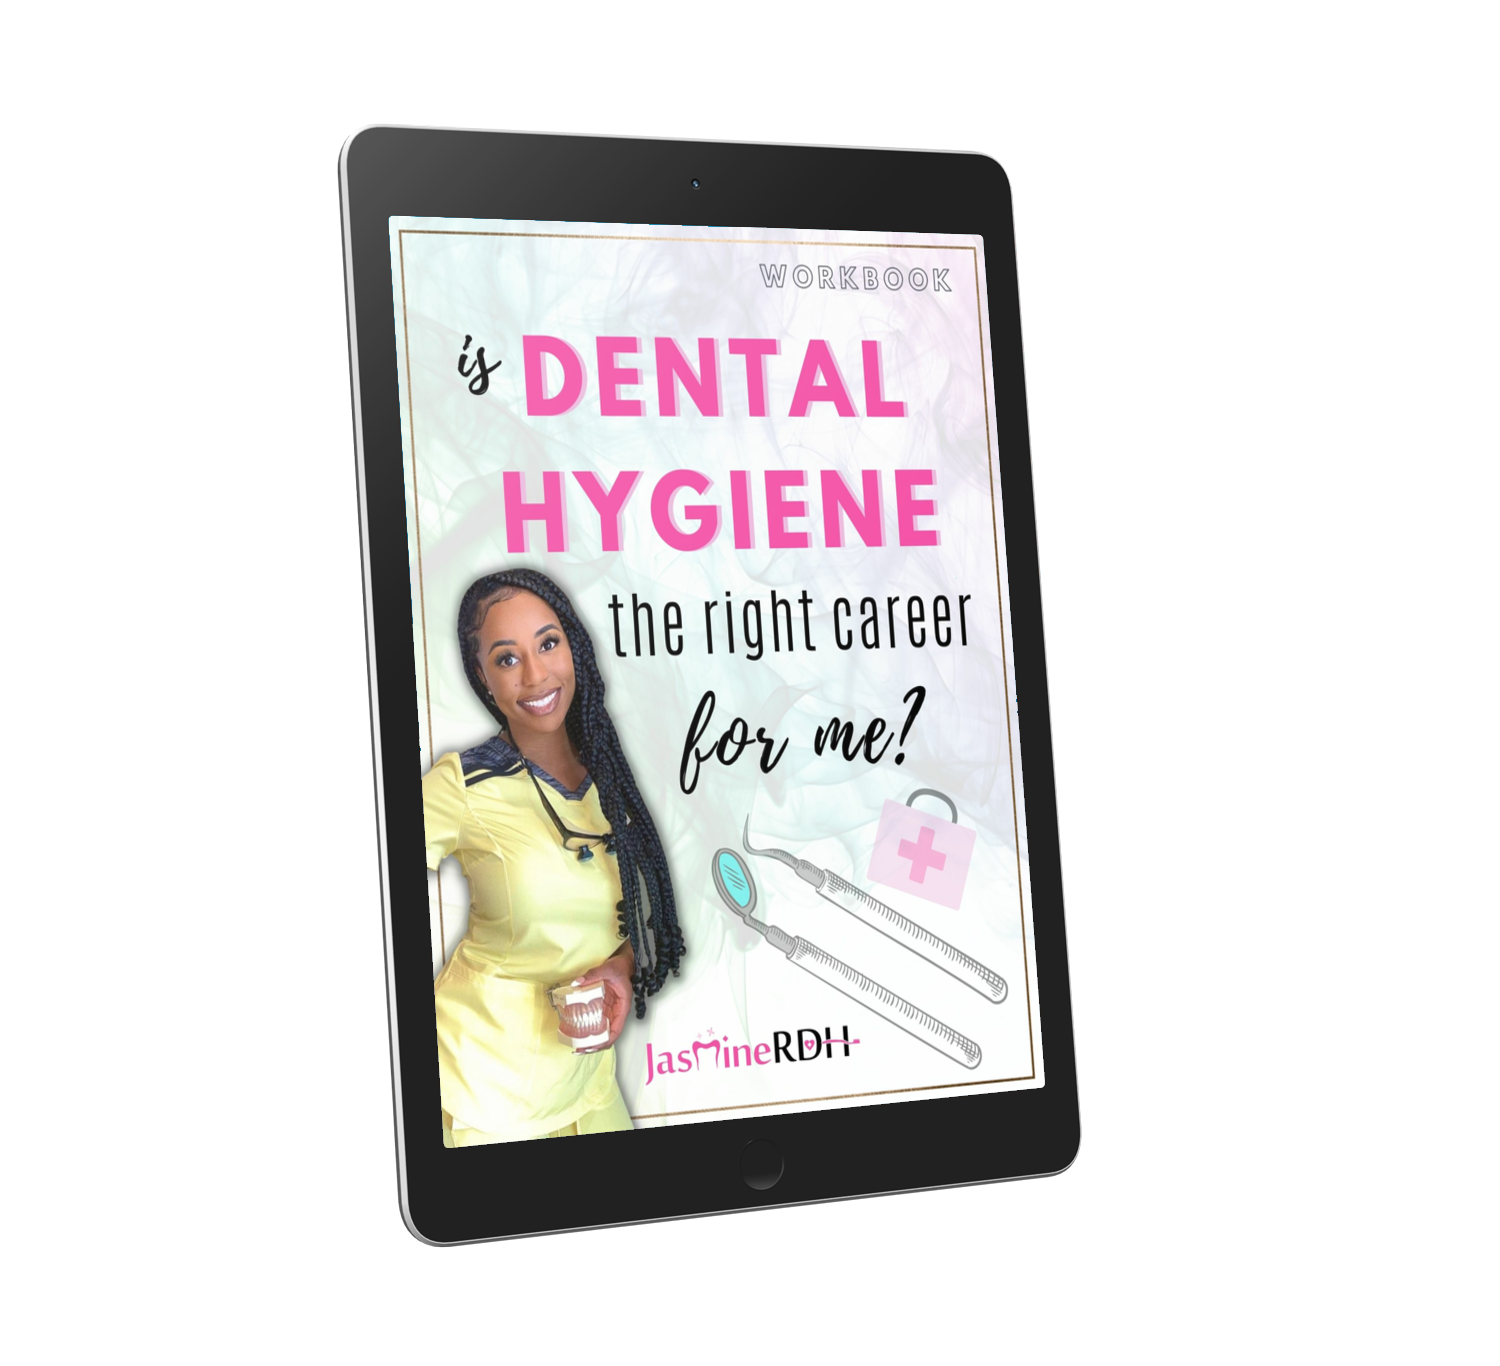 Workbook : Is Dental Hygiene The Right Career For Me?